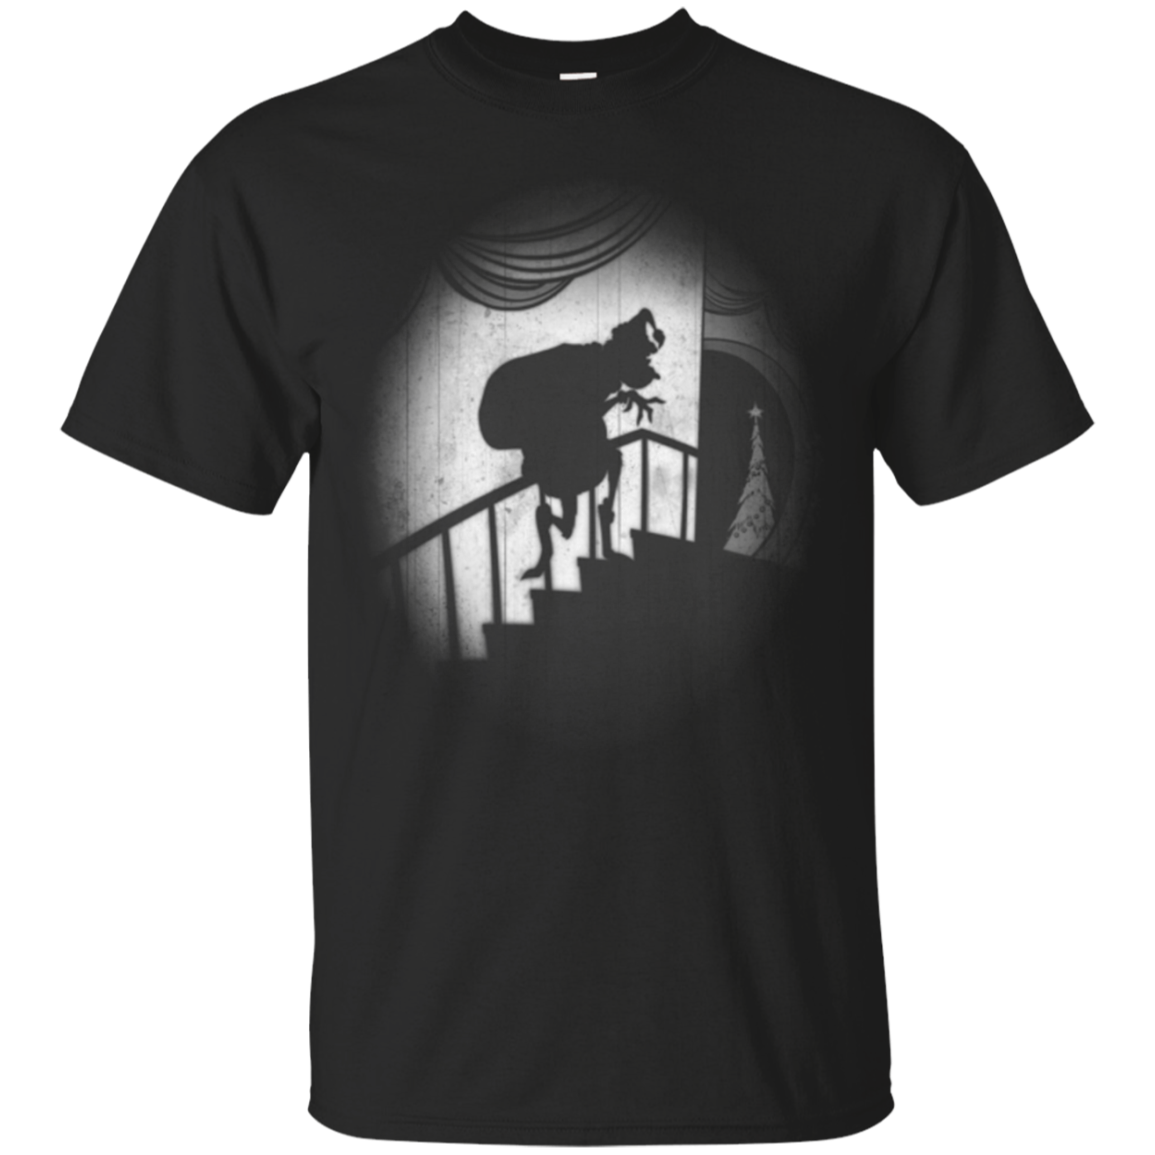 The King of Sinful Sots T-Shirt